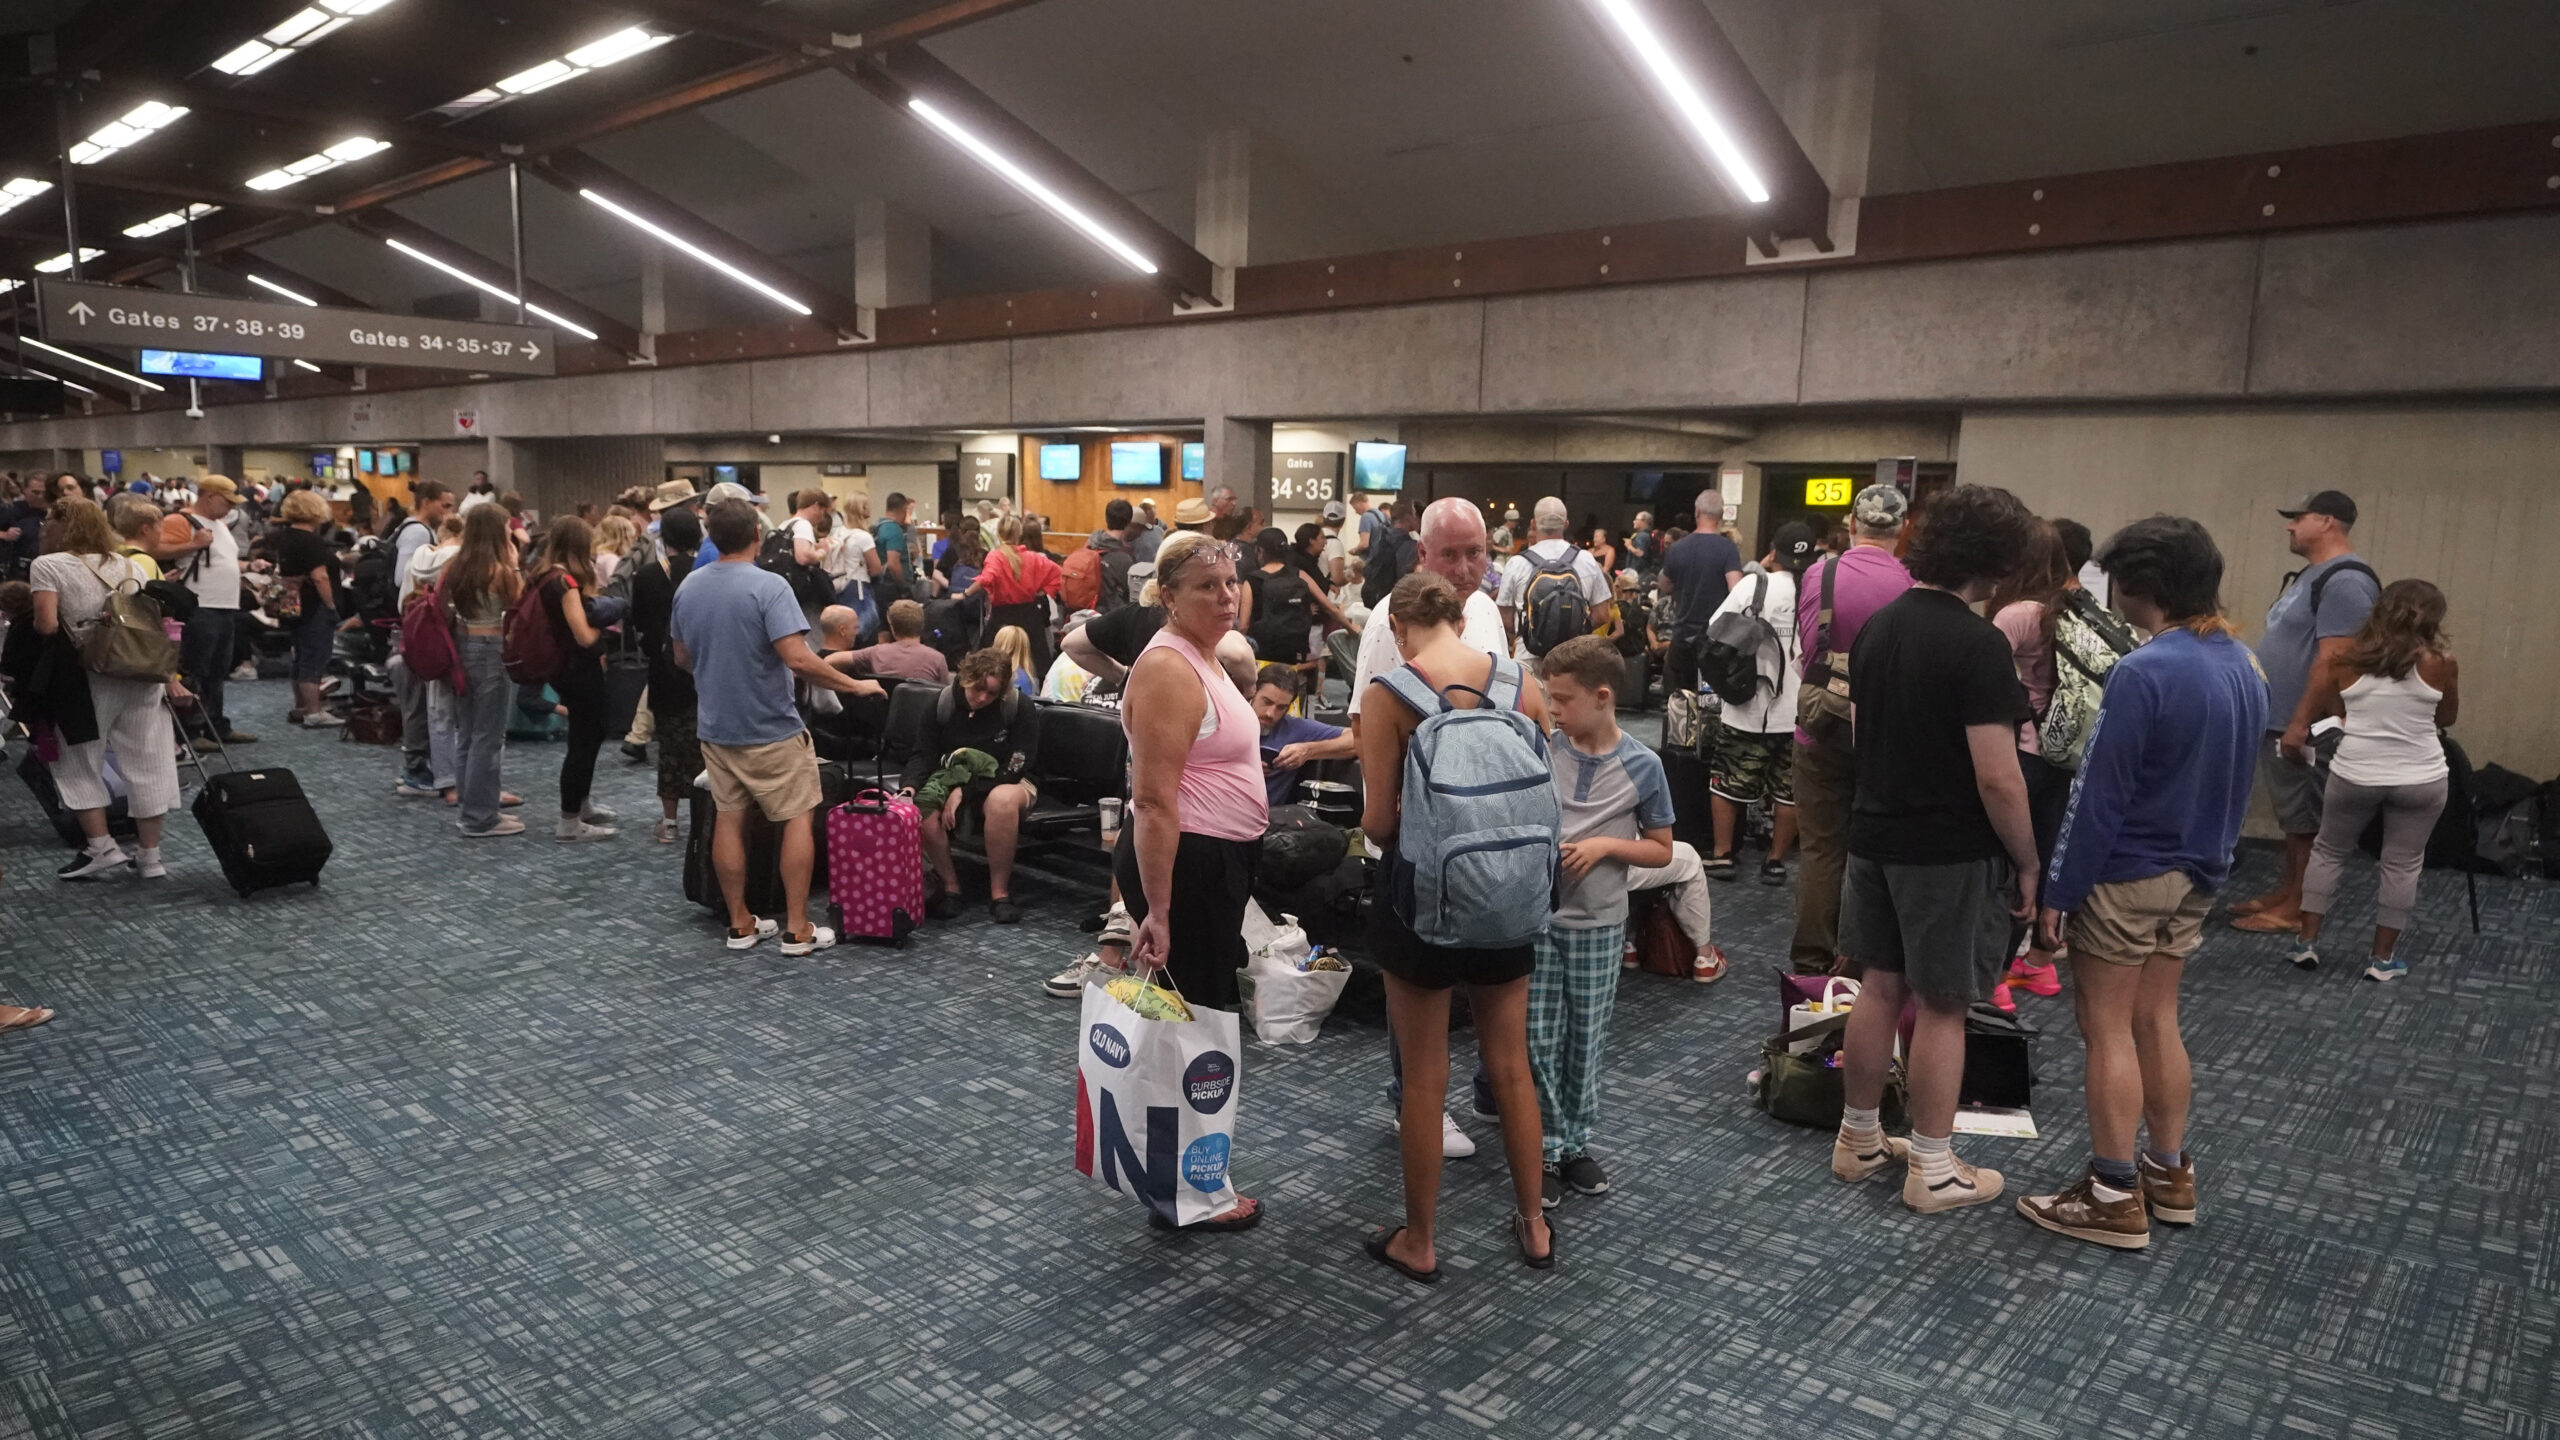 Dozens Dead After Wildfires Destroy Historic Hawaiian Town of Lahaina. People gather while waiting for flights at the Kahului Airport Wednesday, Aug. 9, 2023, in Kahului, Hawaii. Several thousand Hawaii residents raced to escape homes on Maui as the Lahaina fire swept across the island, killing multiple people and burning parts of a centuries-old town. (AP Photo/Rick Bowmer)